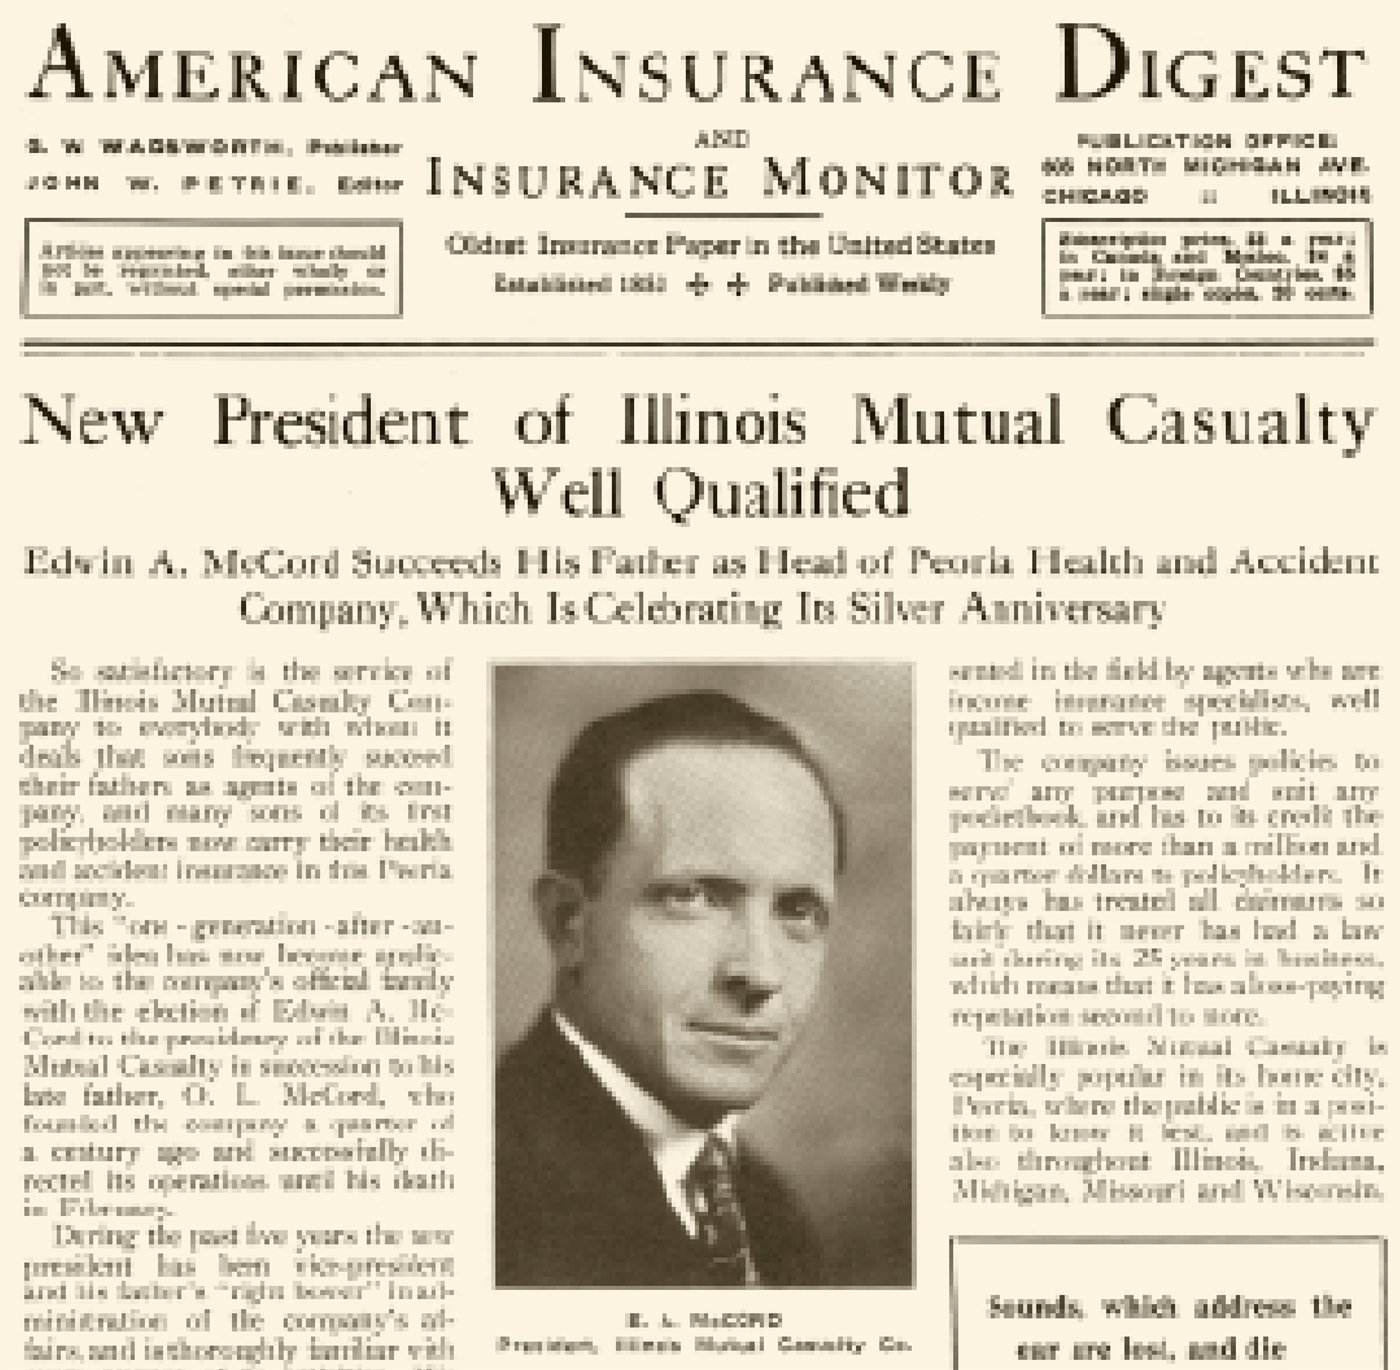 Newspaper article announcing E.A. McCord as President of Illinois Mutual Casualty Company.